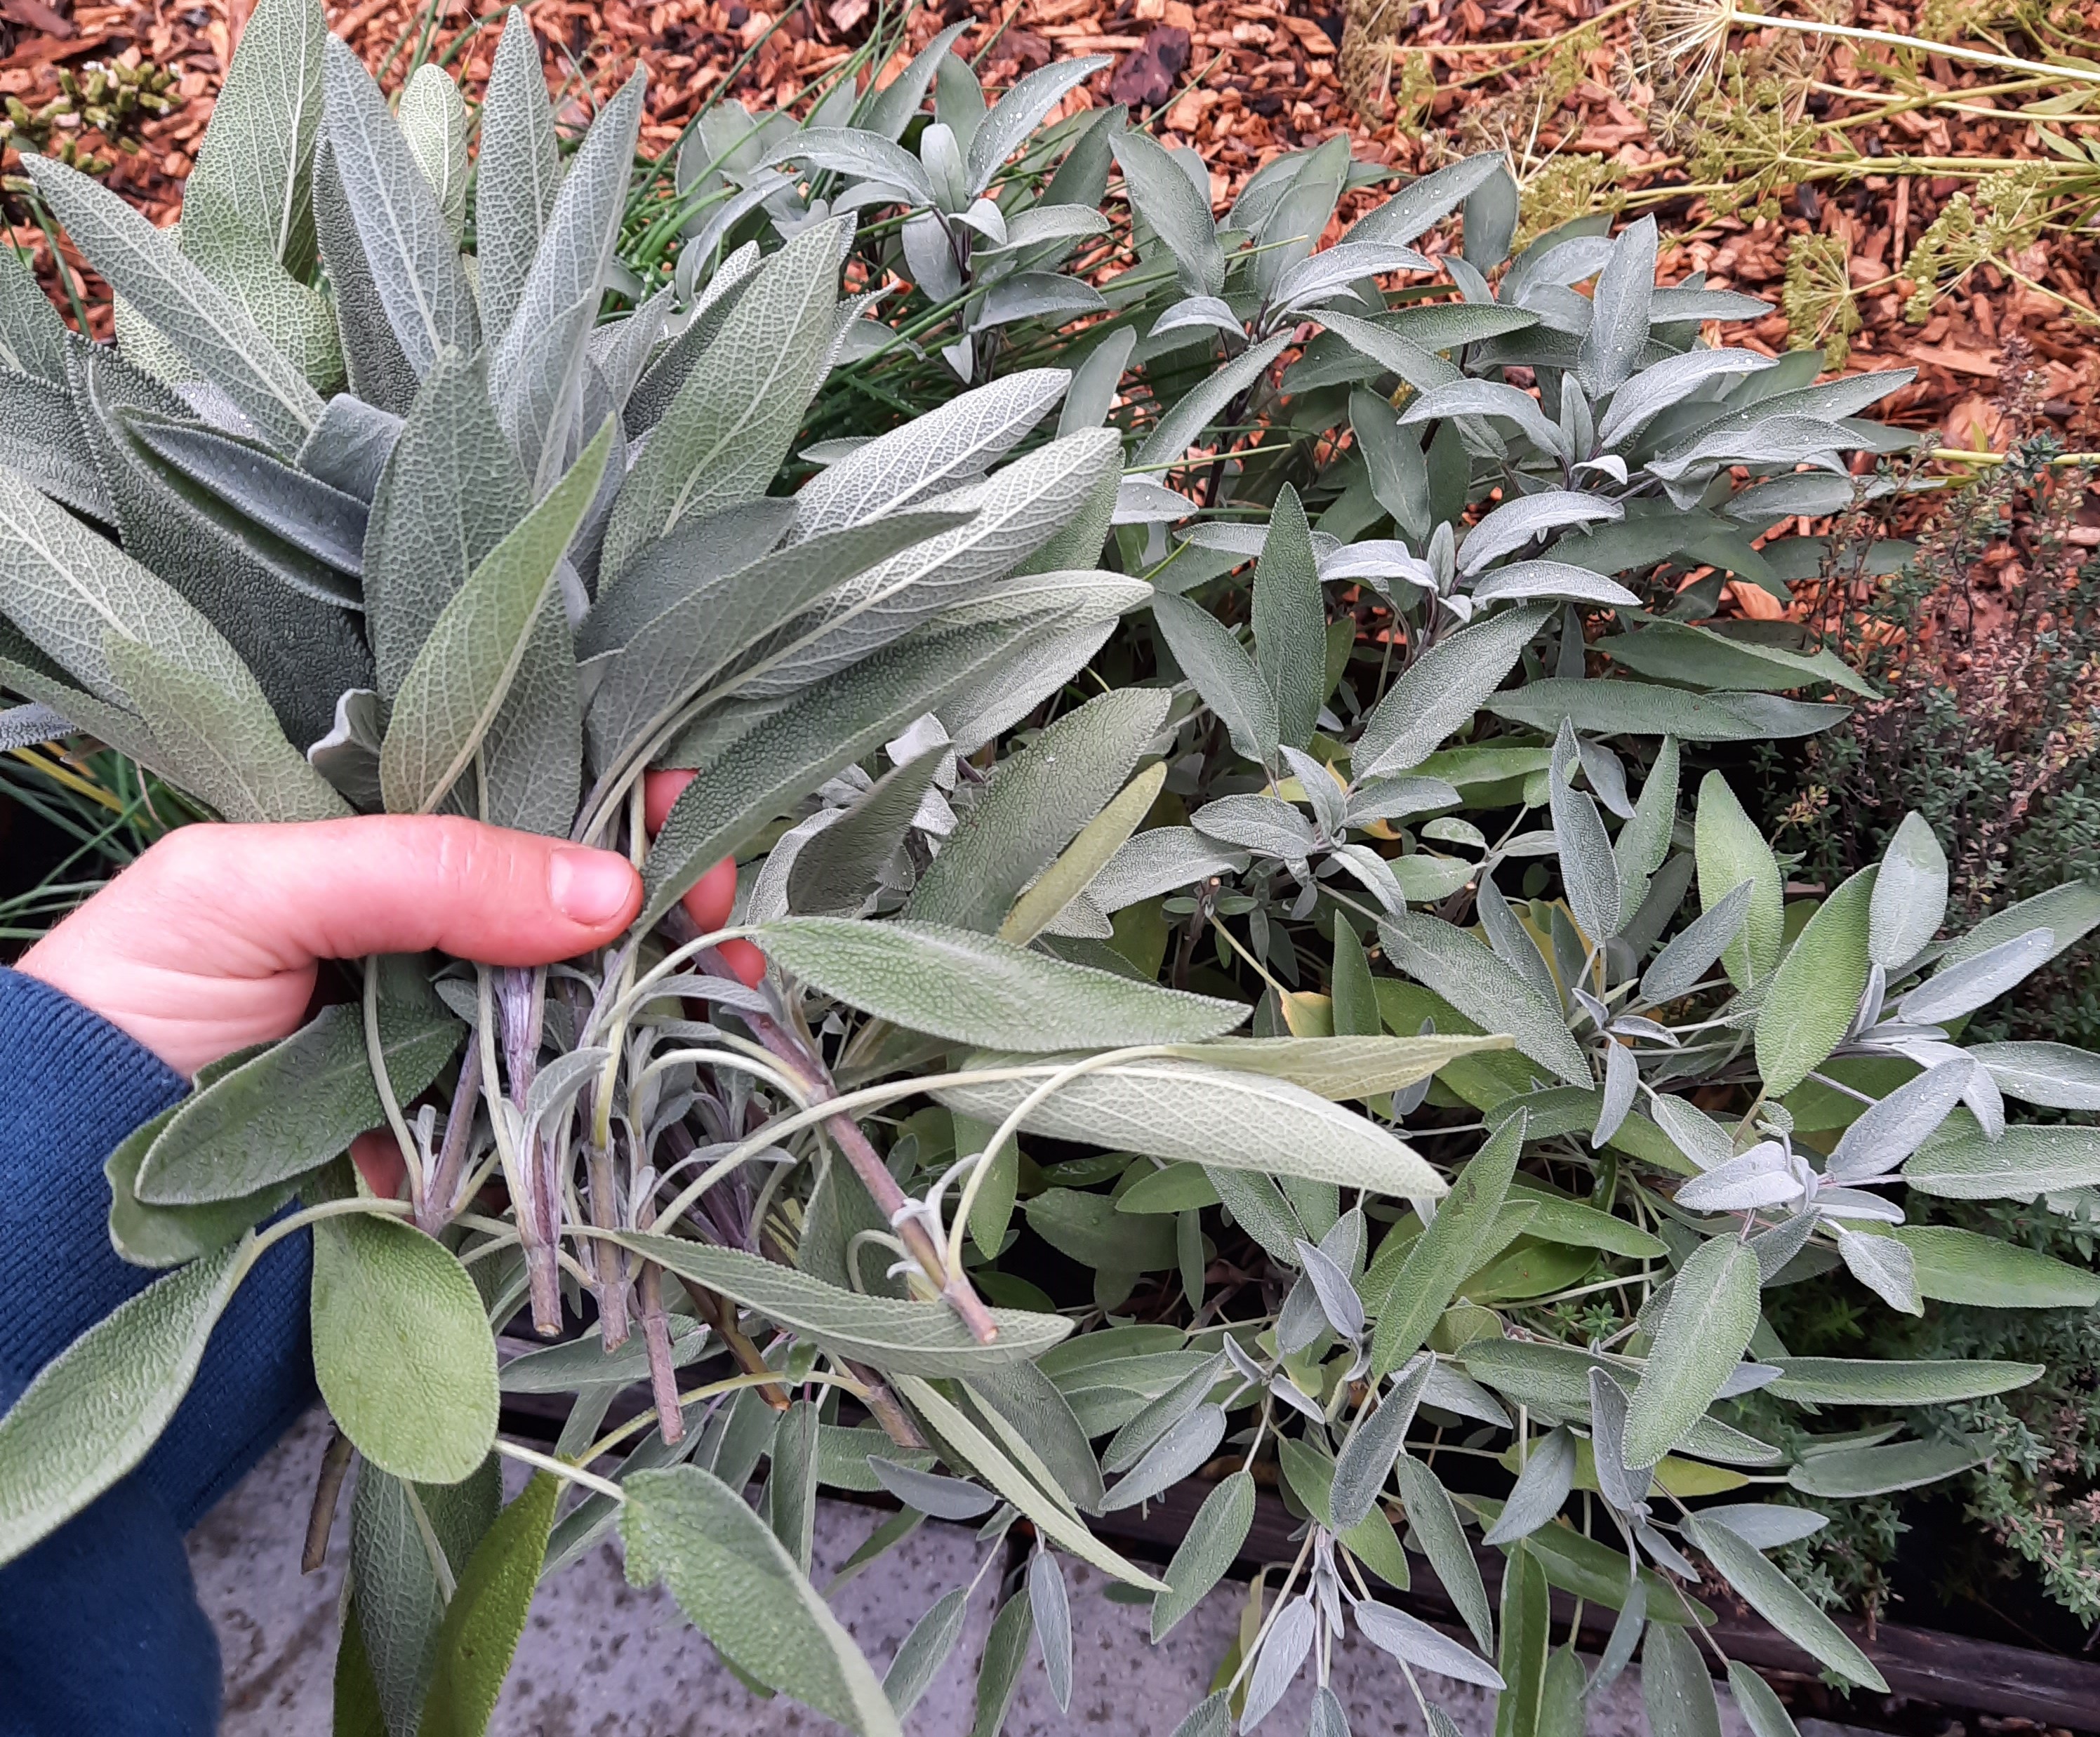 A hand holding harvested sage with a sage plant in the background